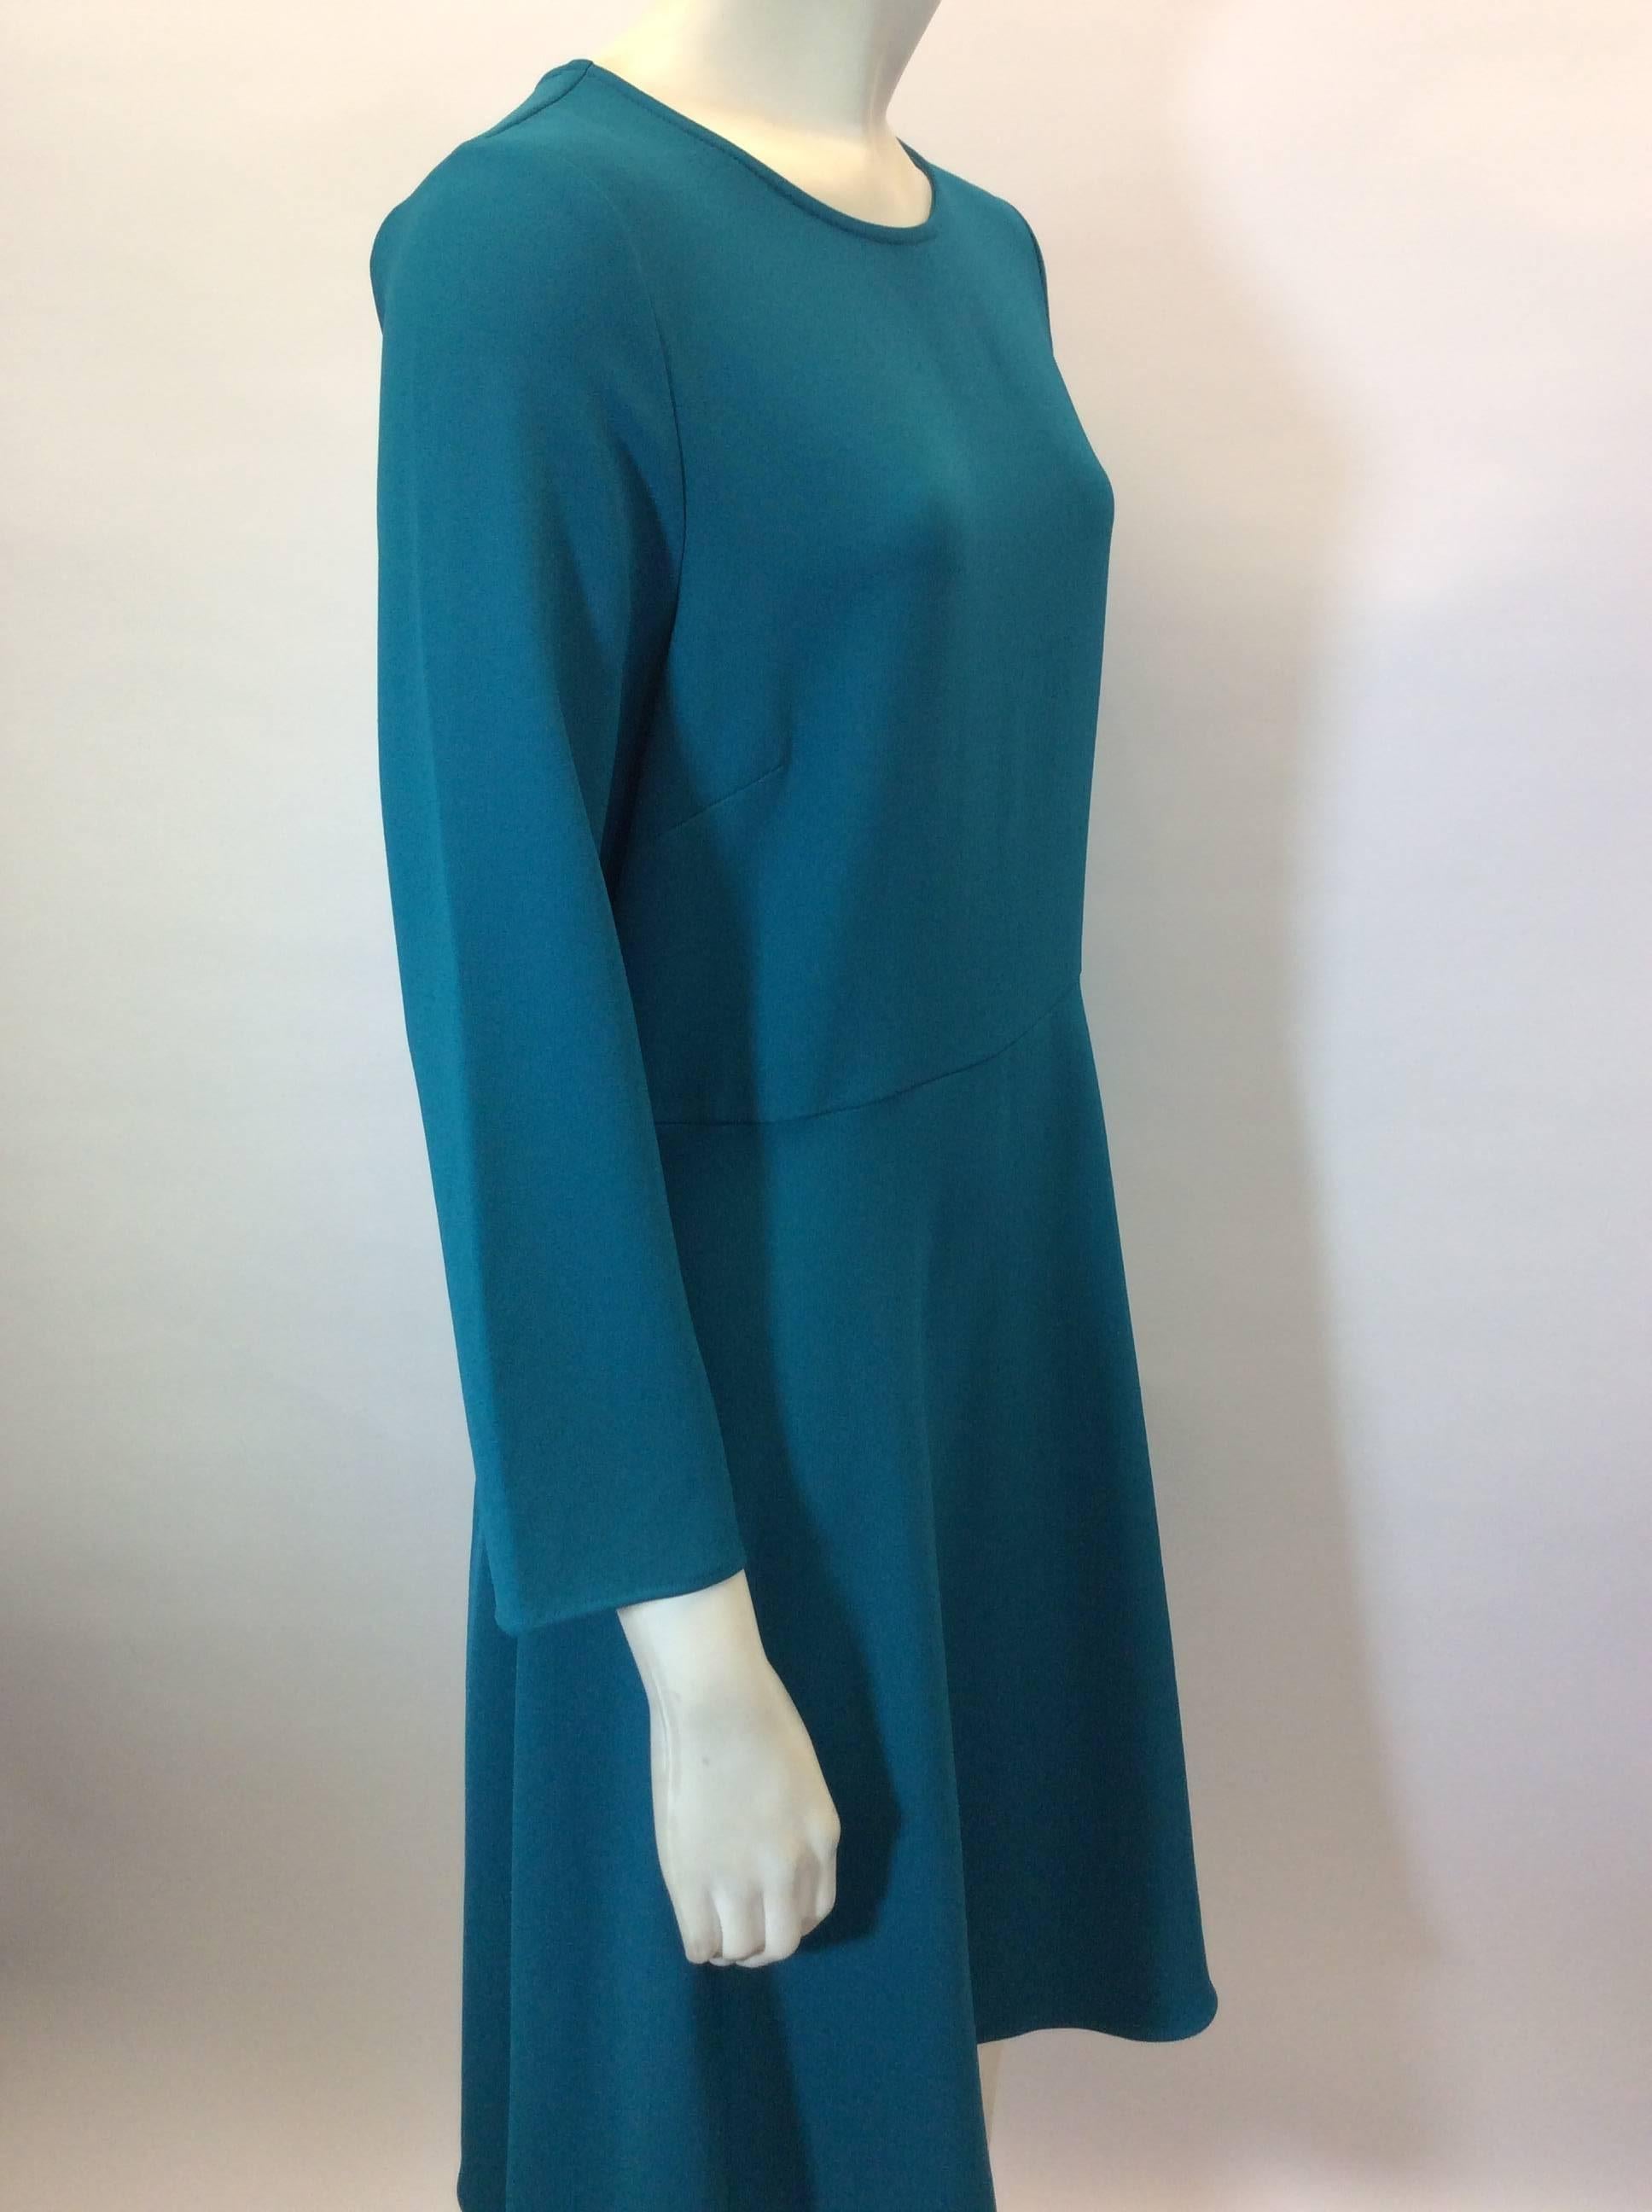 Teal Skater Style Dress with 3/4 Sleeves
Center back invisible zipper closure
Button closure on back neckline
3/4 length sleeves
Knee length
Size Medium
97% Polyester, 3% Elastic